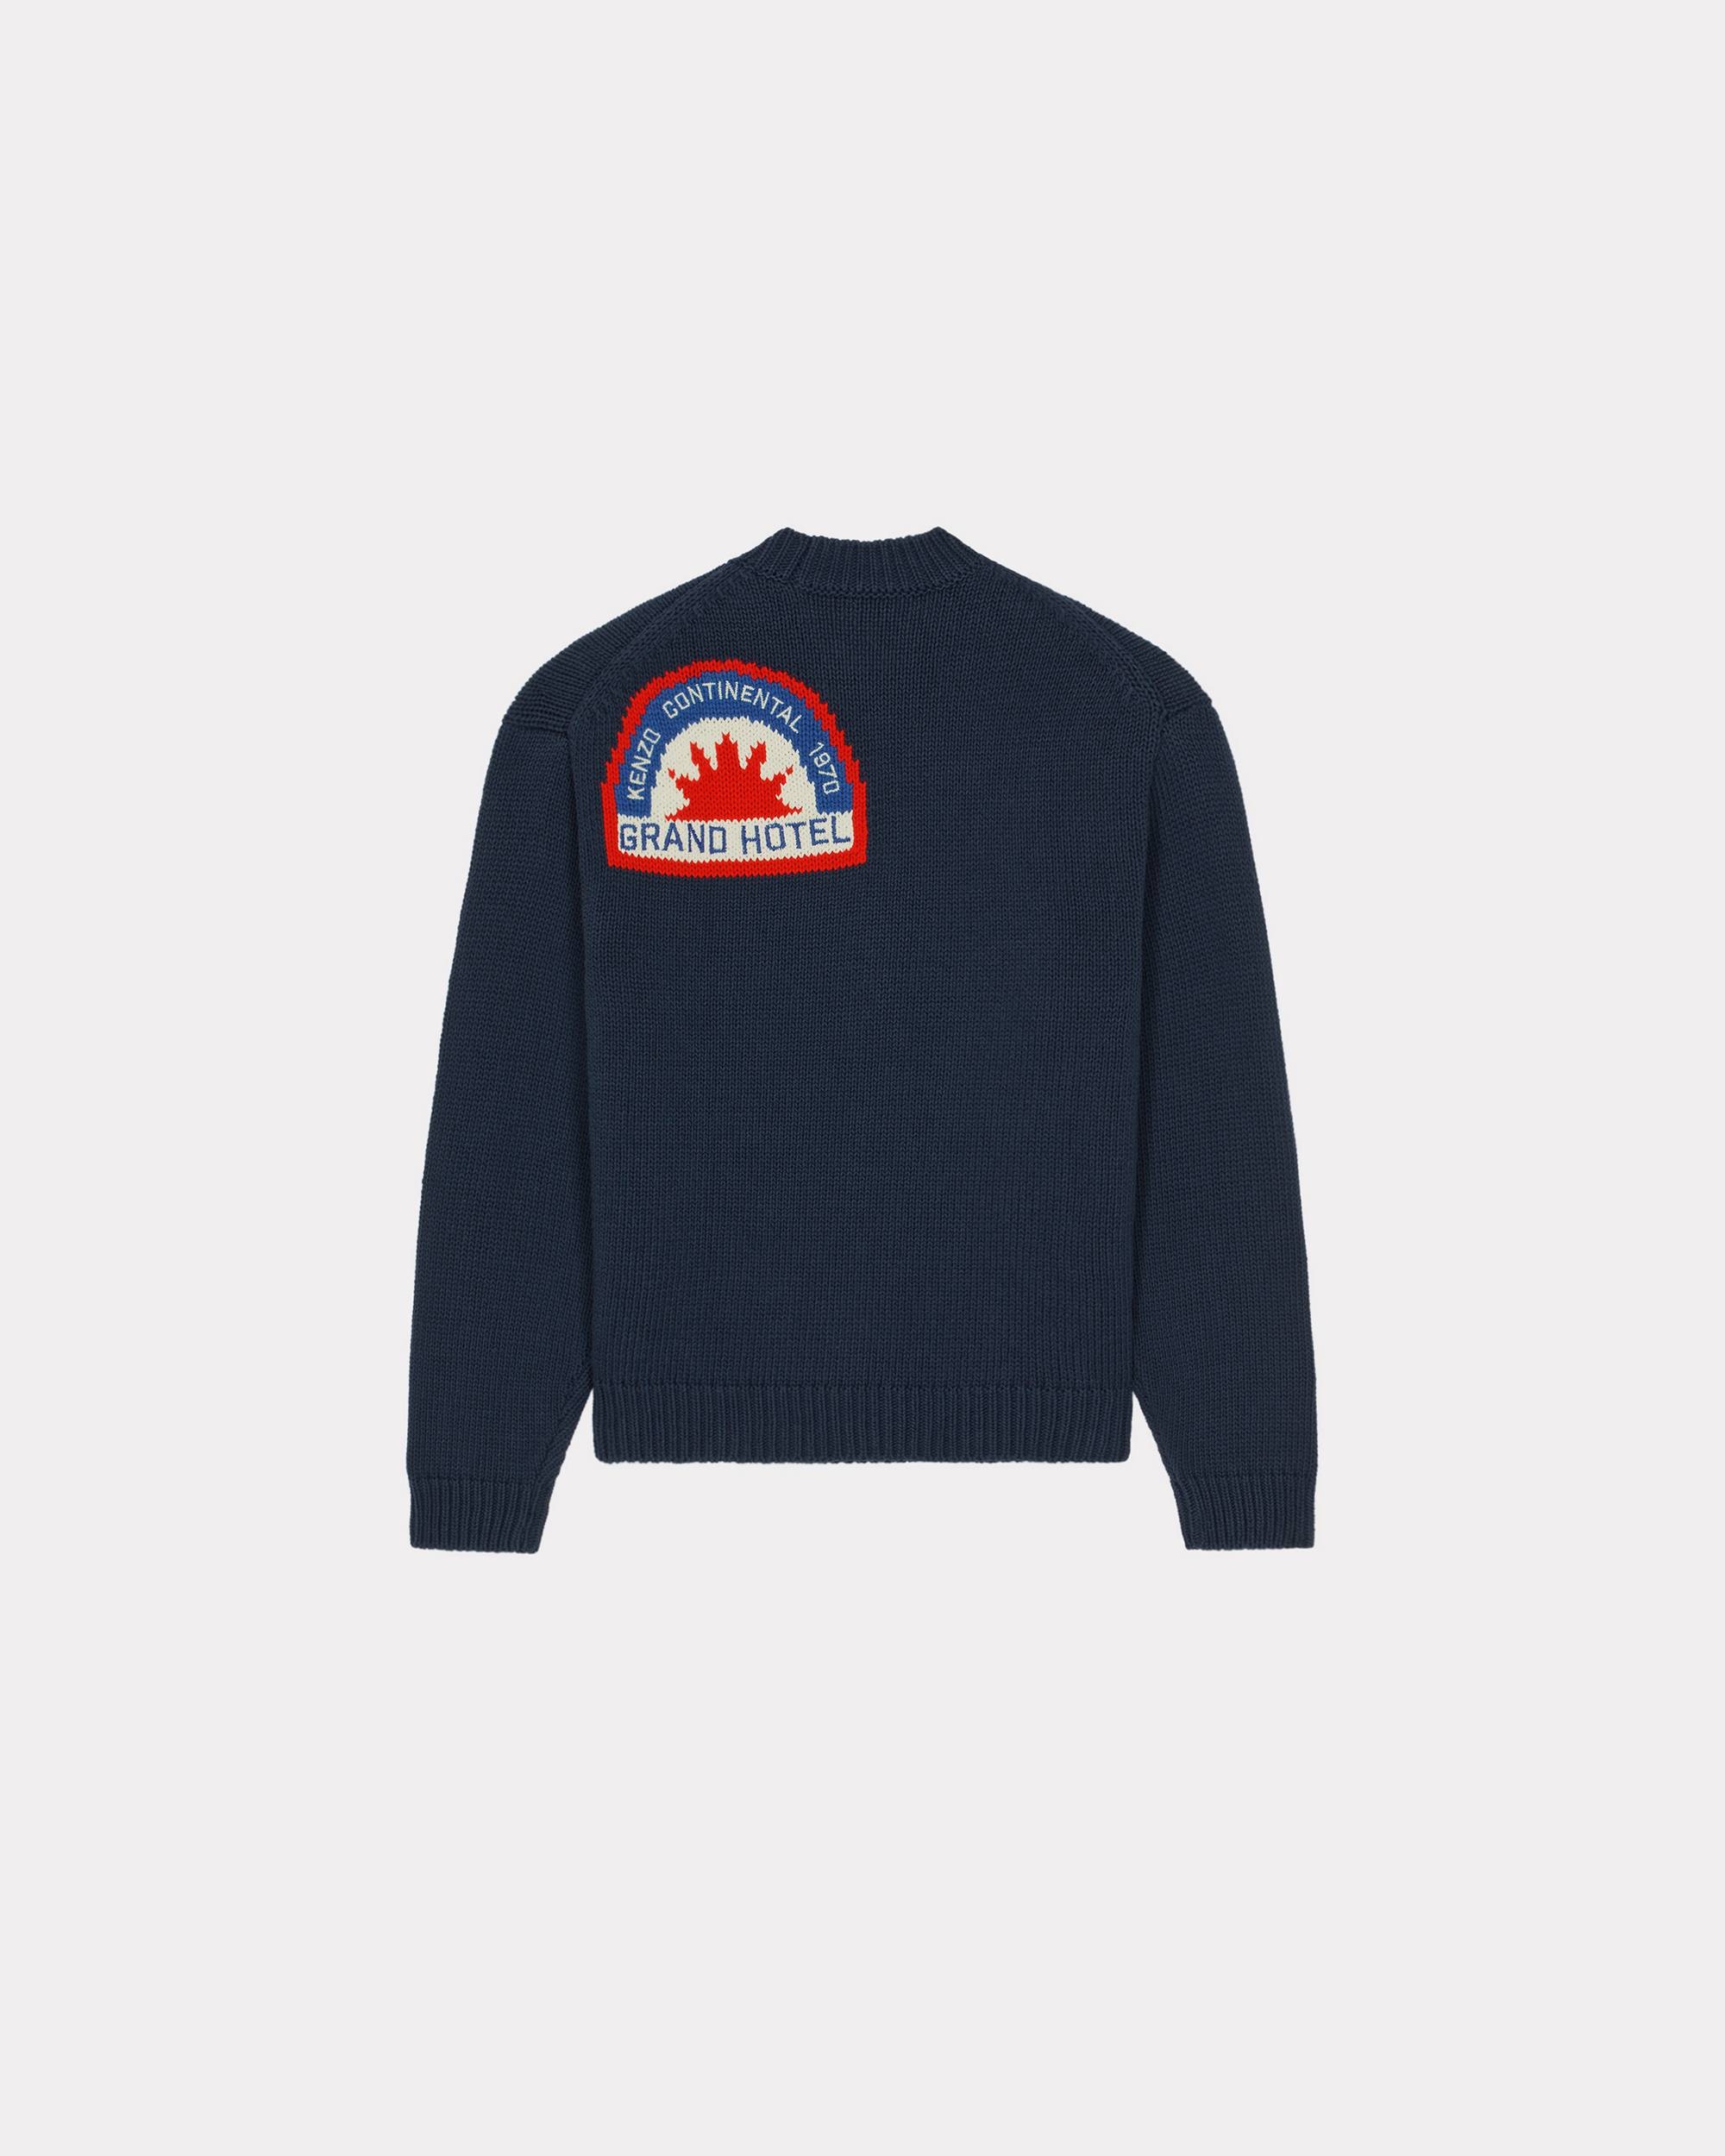 'KENZO Travel' hand-embroidered jumper - 2